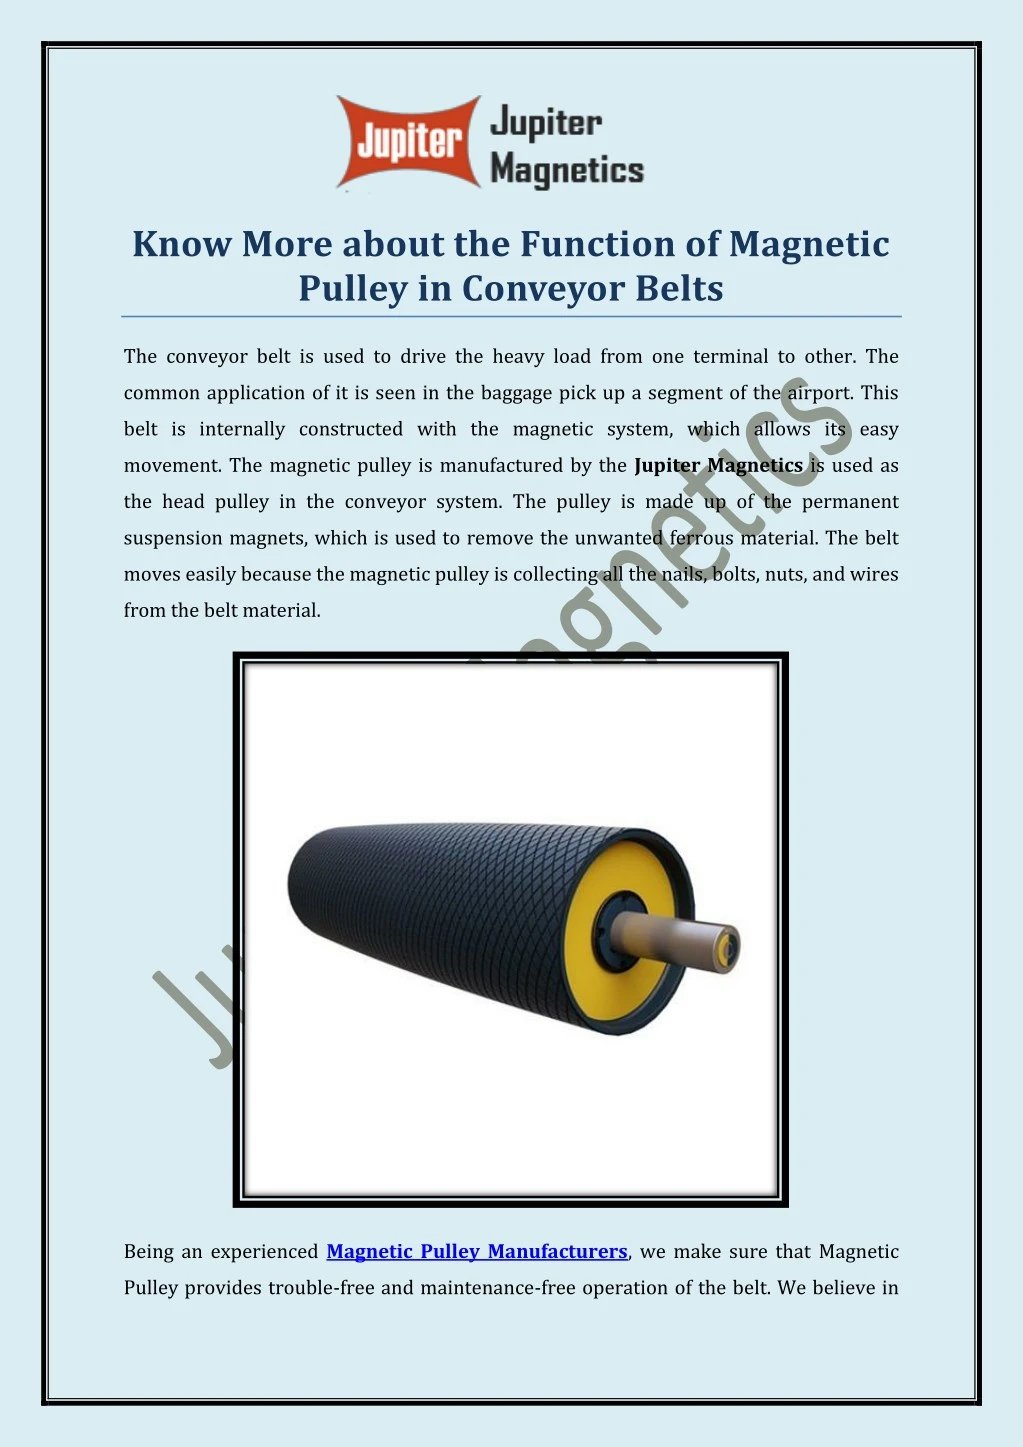 know more about the function of magnetic pulley